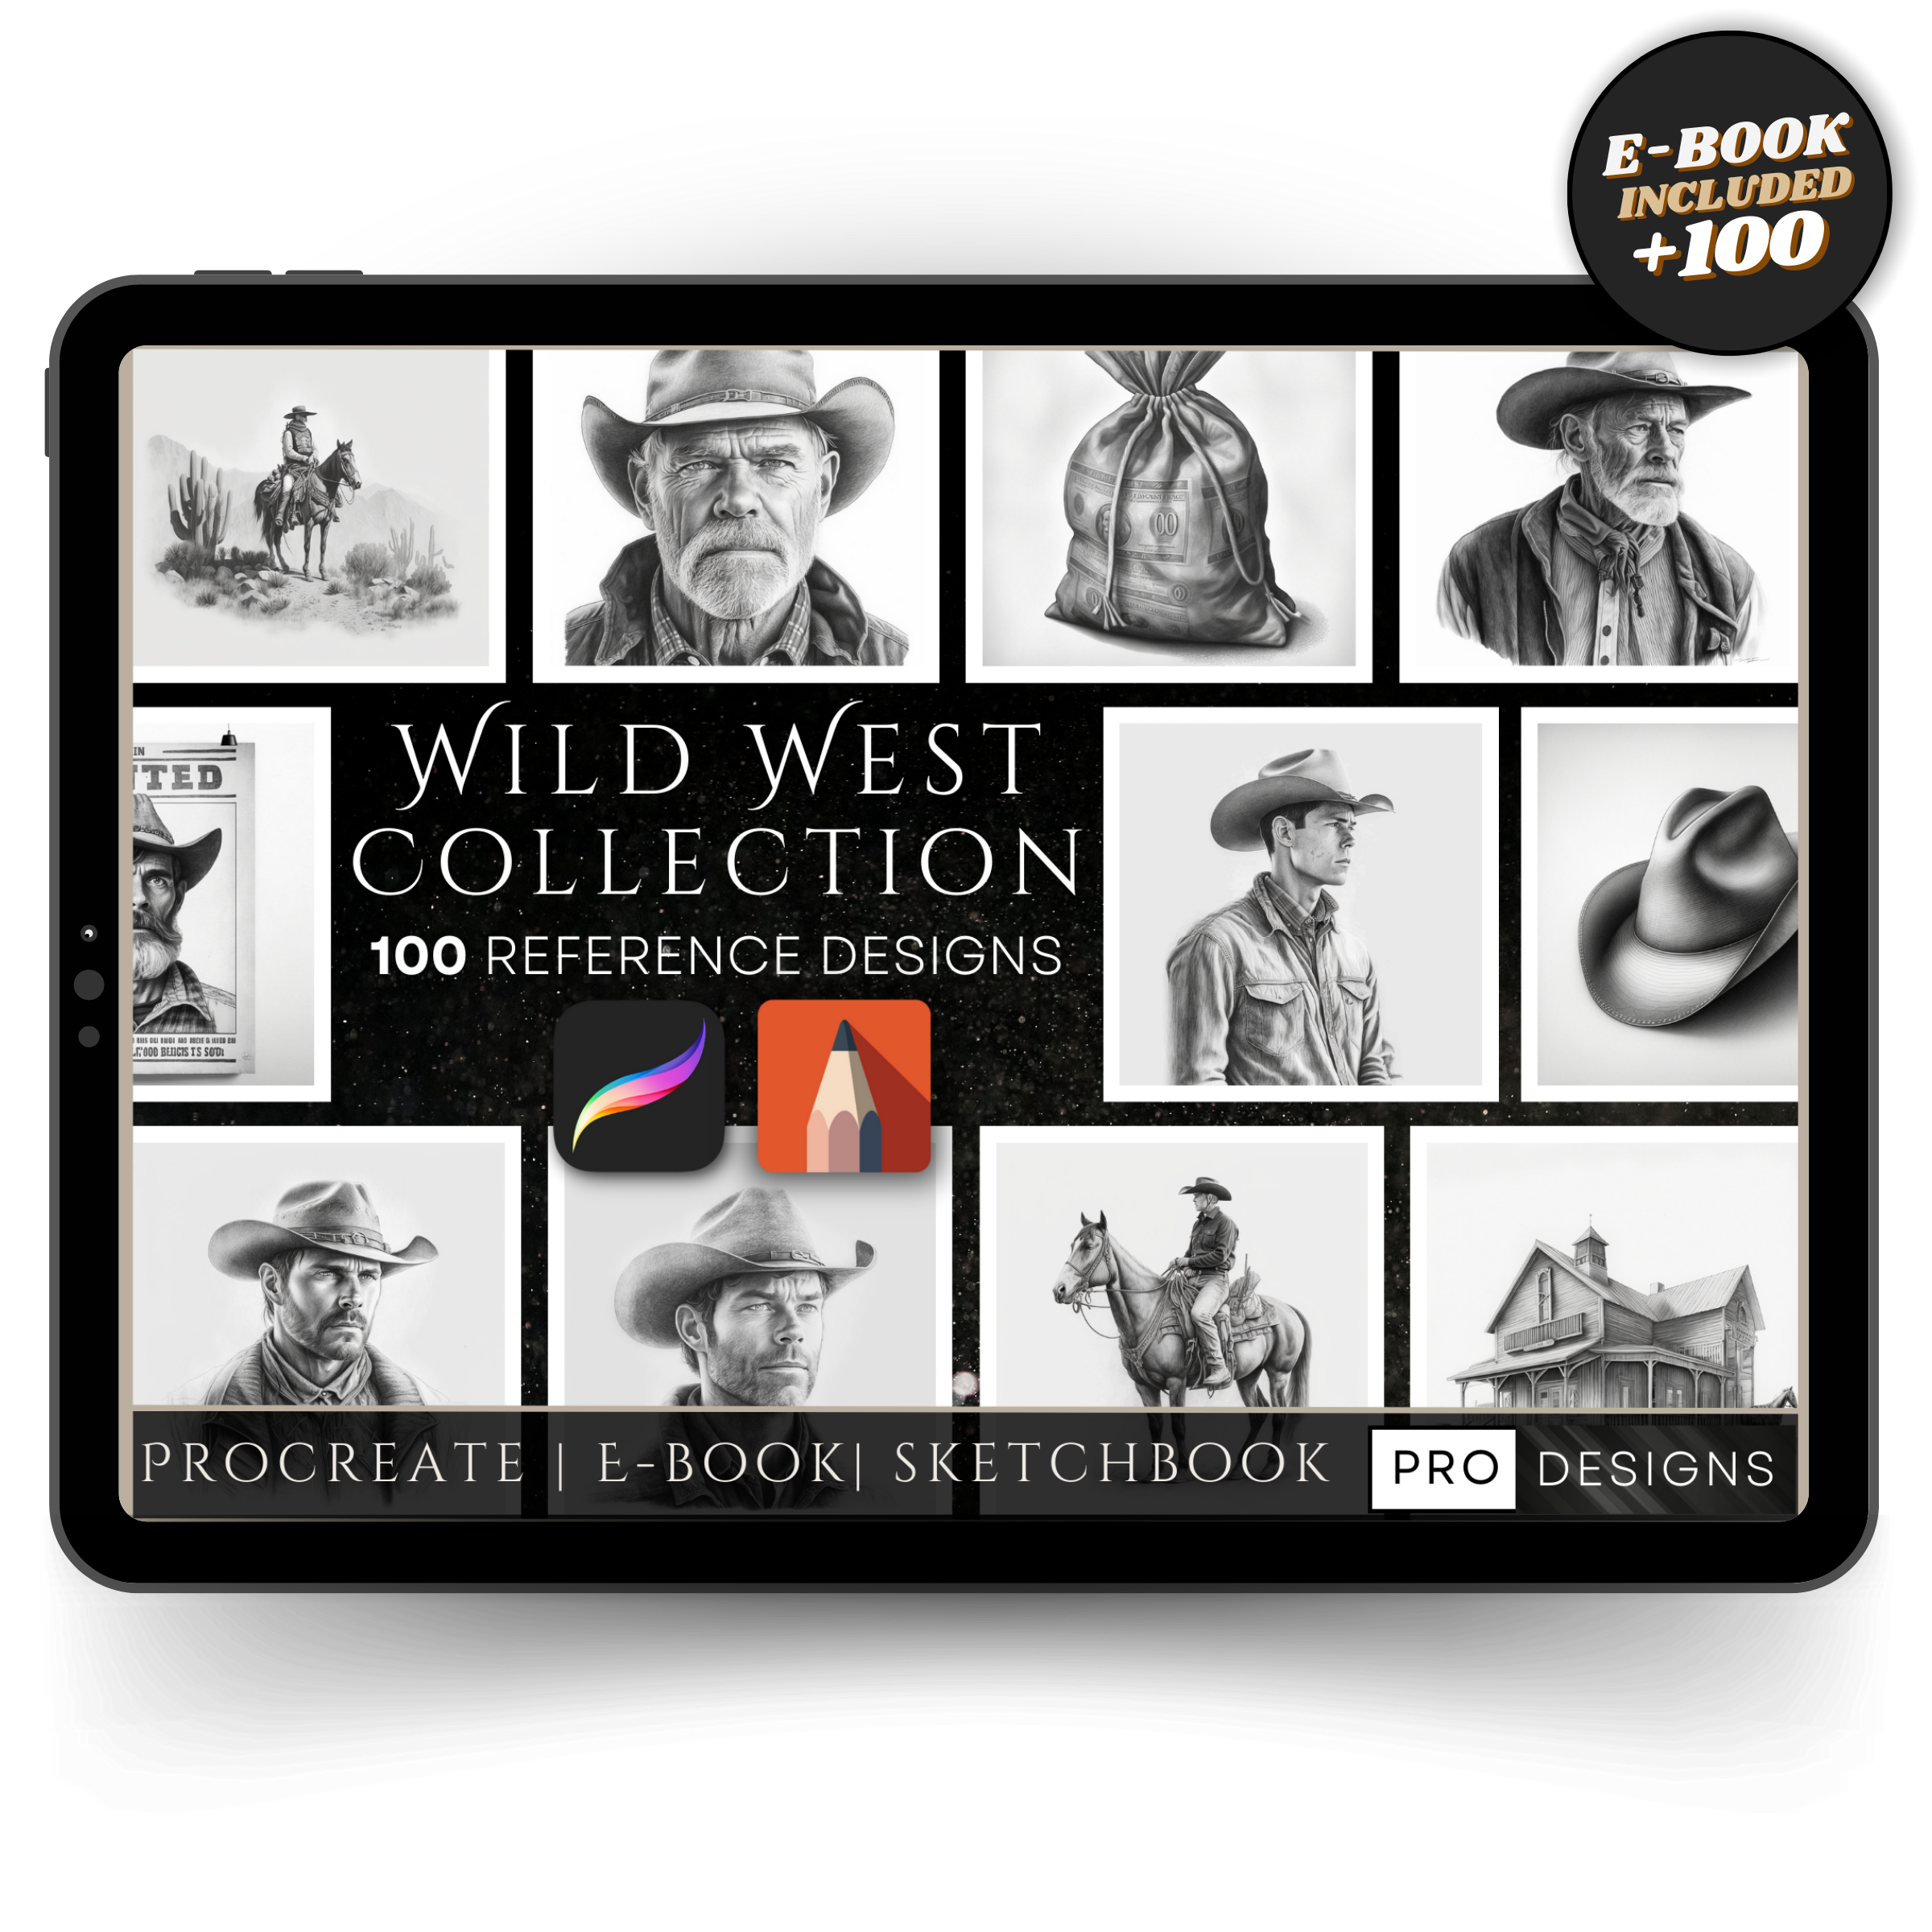 "Frontier Legends" - The Wild West Collection